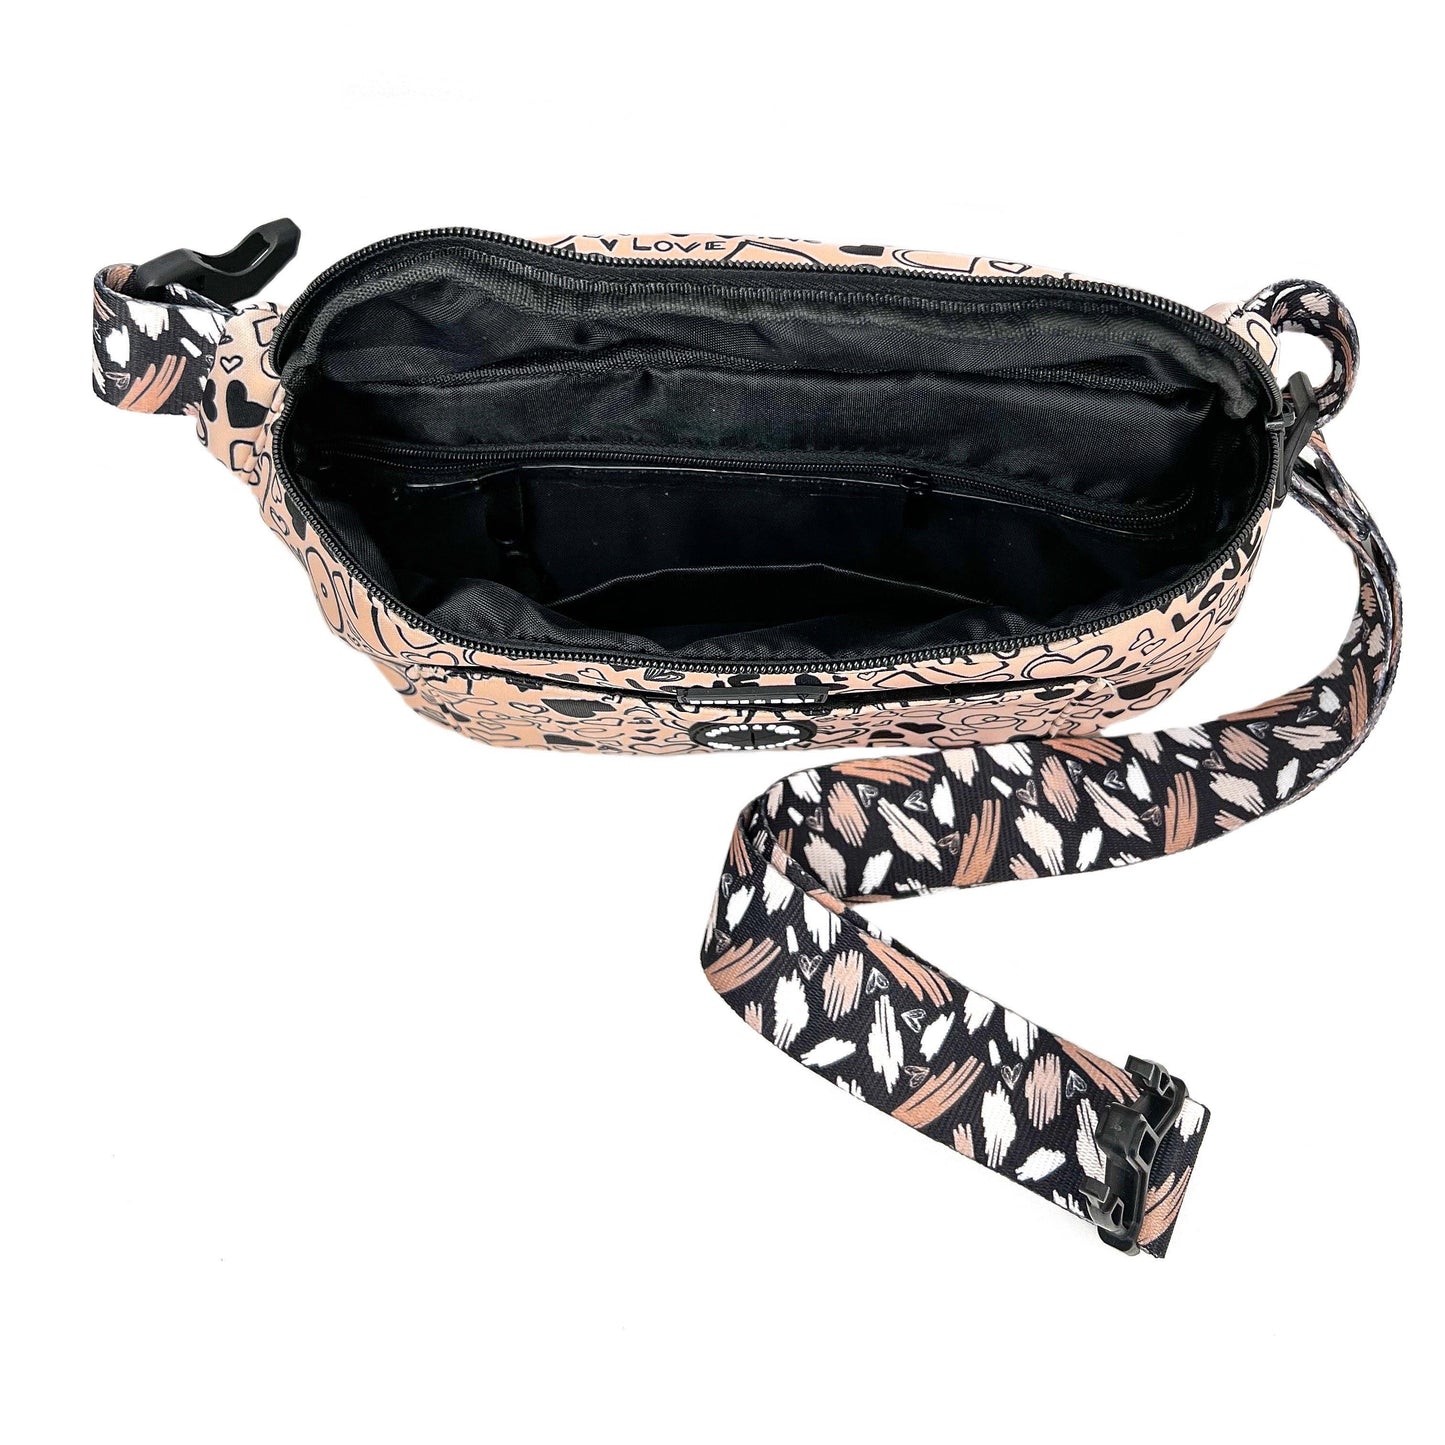 Shop Neutral Print Signature Hip Fanny Pack with Zipper and Pockets by Boogs & Boop